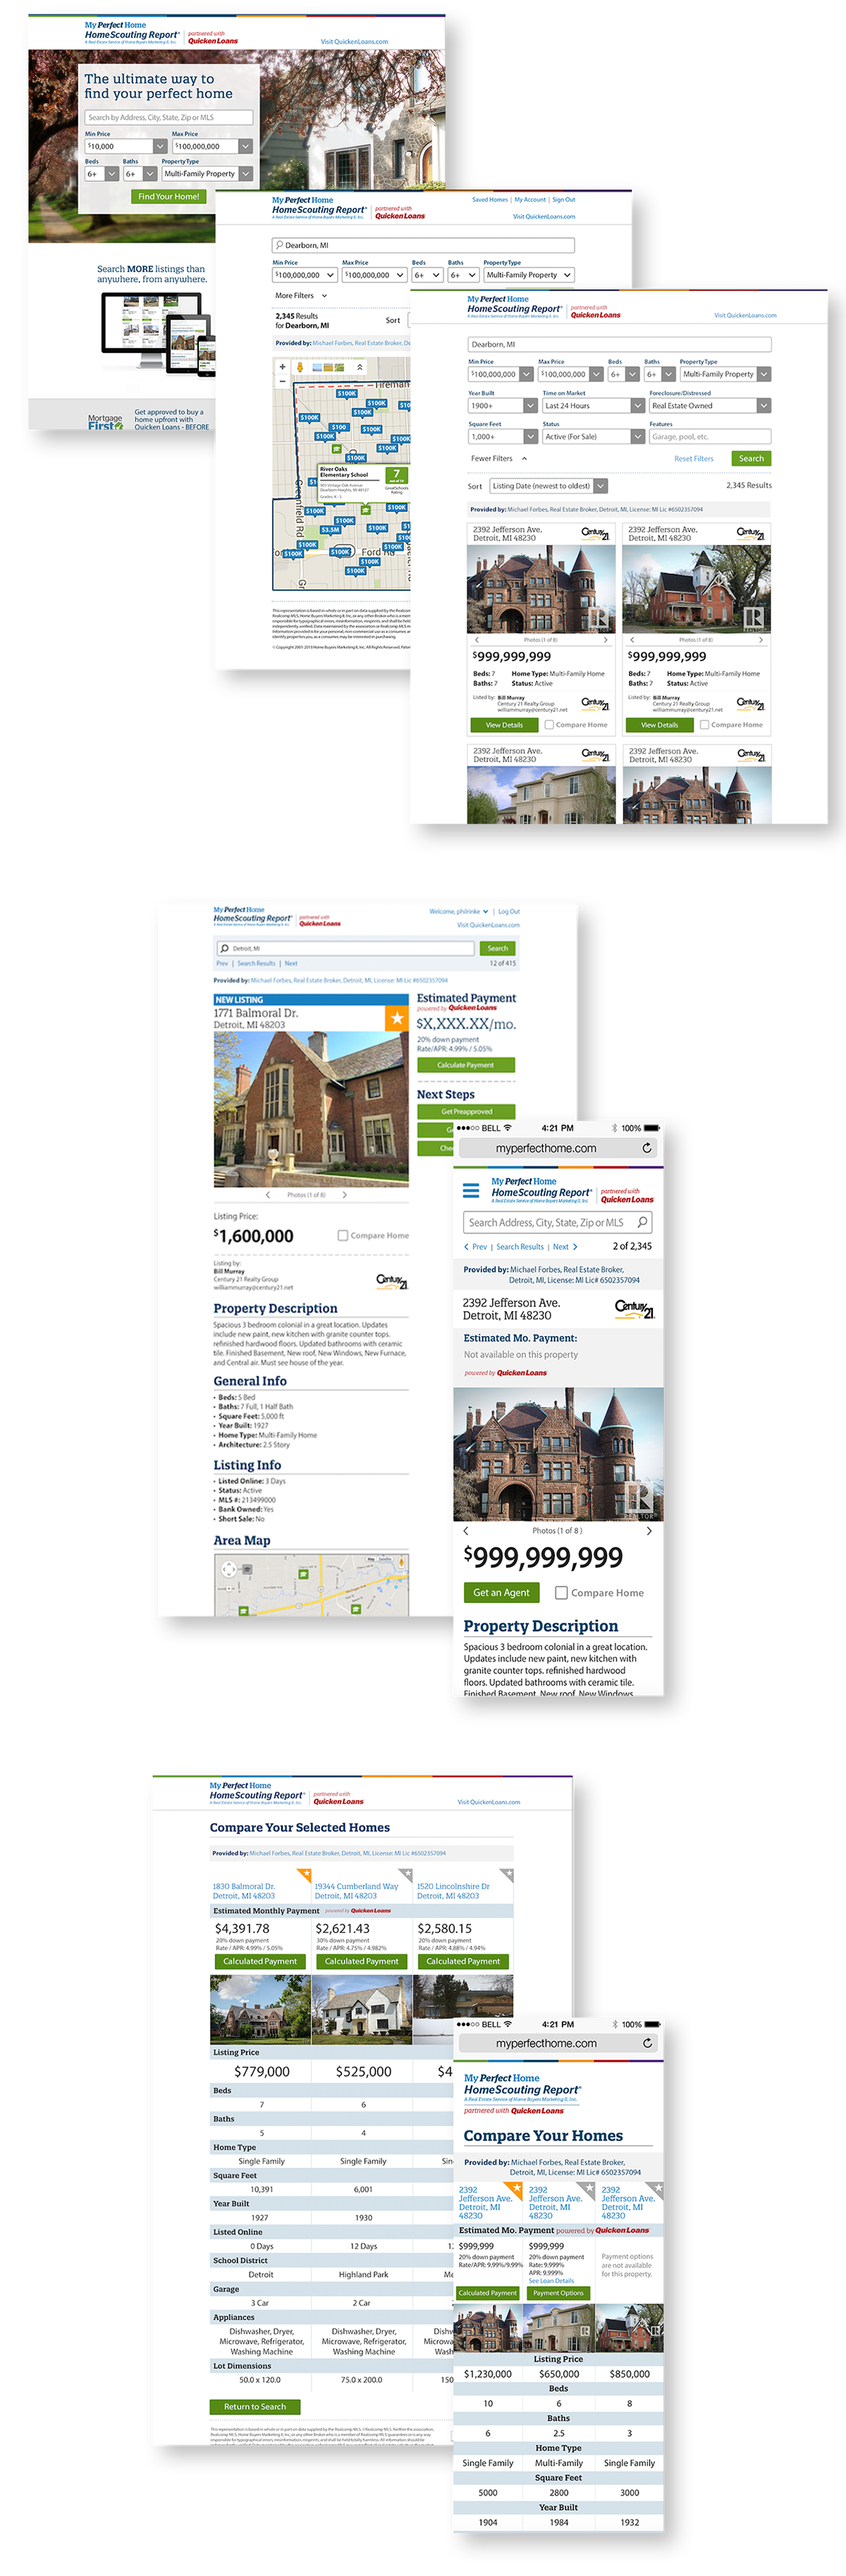 Responsive Design UI/UX Home Search  User research